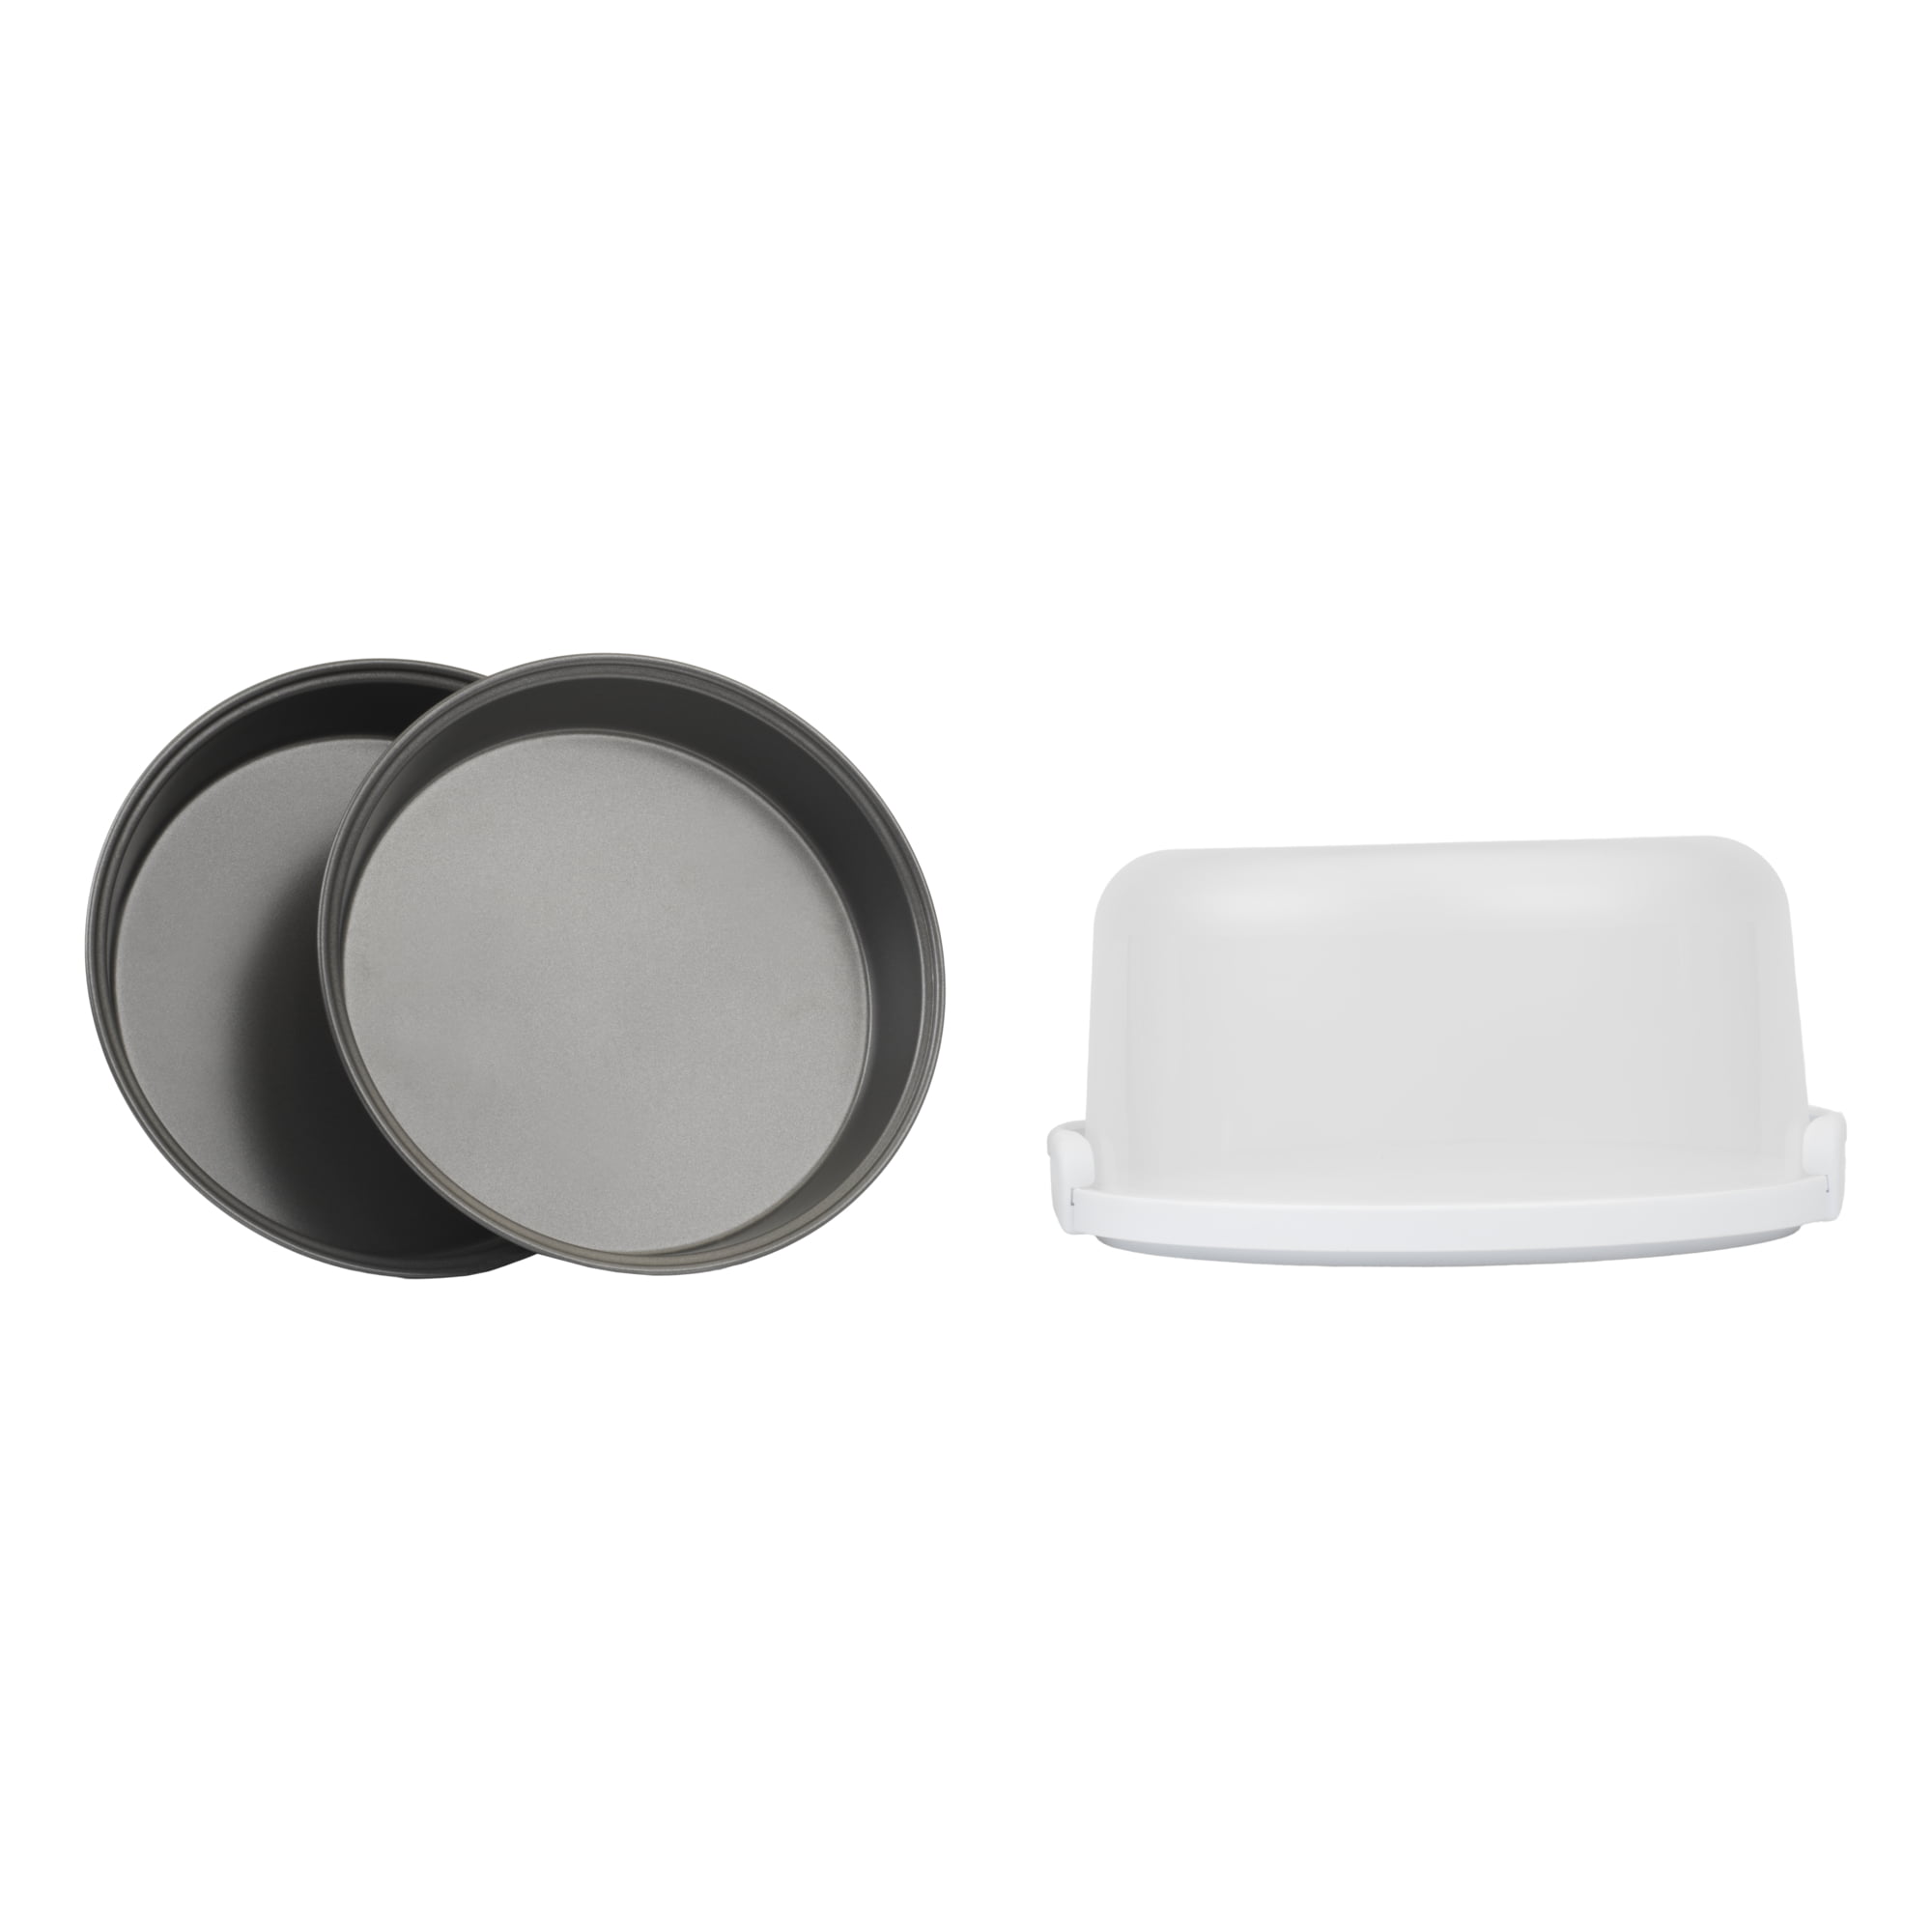 Mainstays 12 inch Cake Carrier with 9 inch Round Pans, Carbon Steel, Grey,  2 Pack